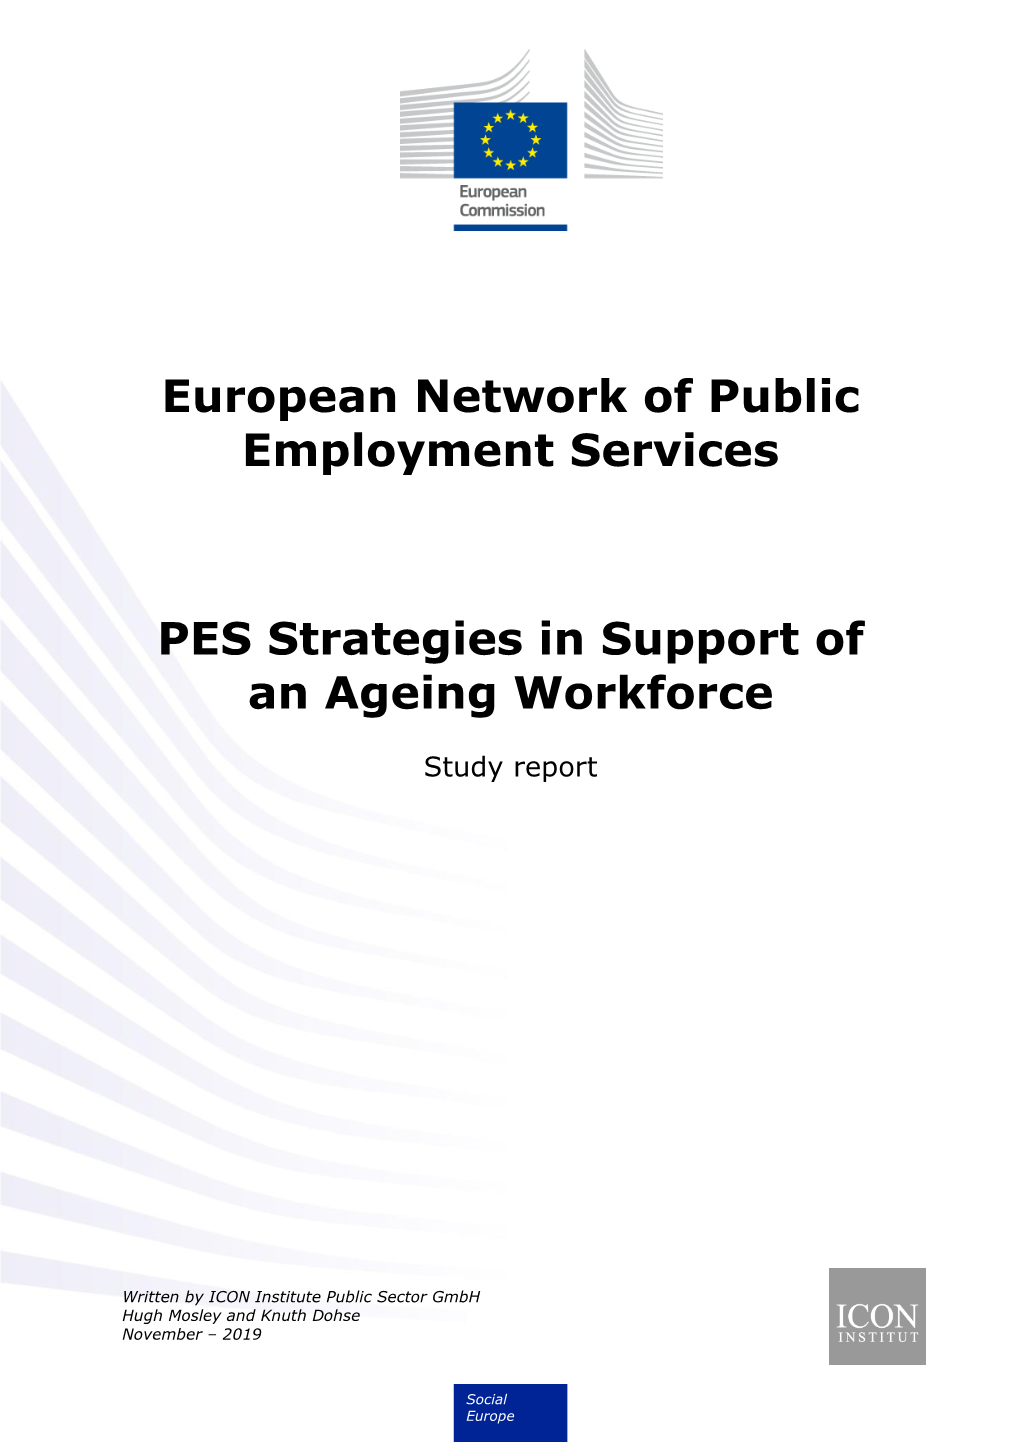 PES Strategies in Support of an Ageing Workforce